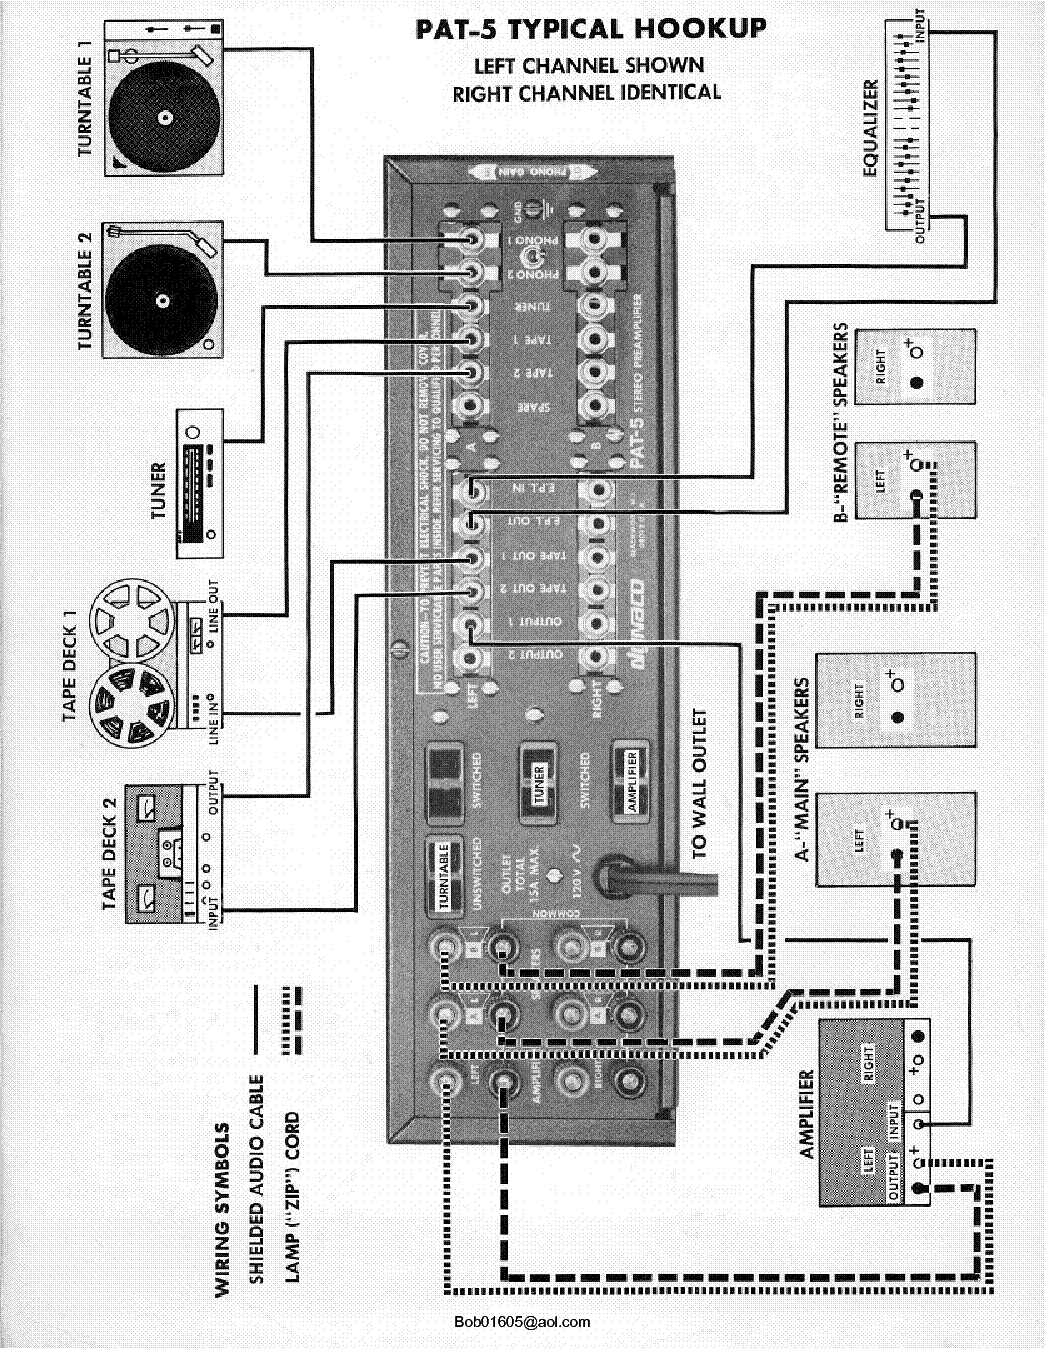 DYNACO PAT-5 ASSEMBLY MANUAL service manual (2nd page)